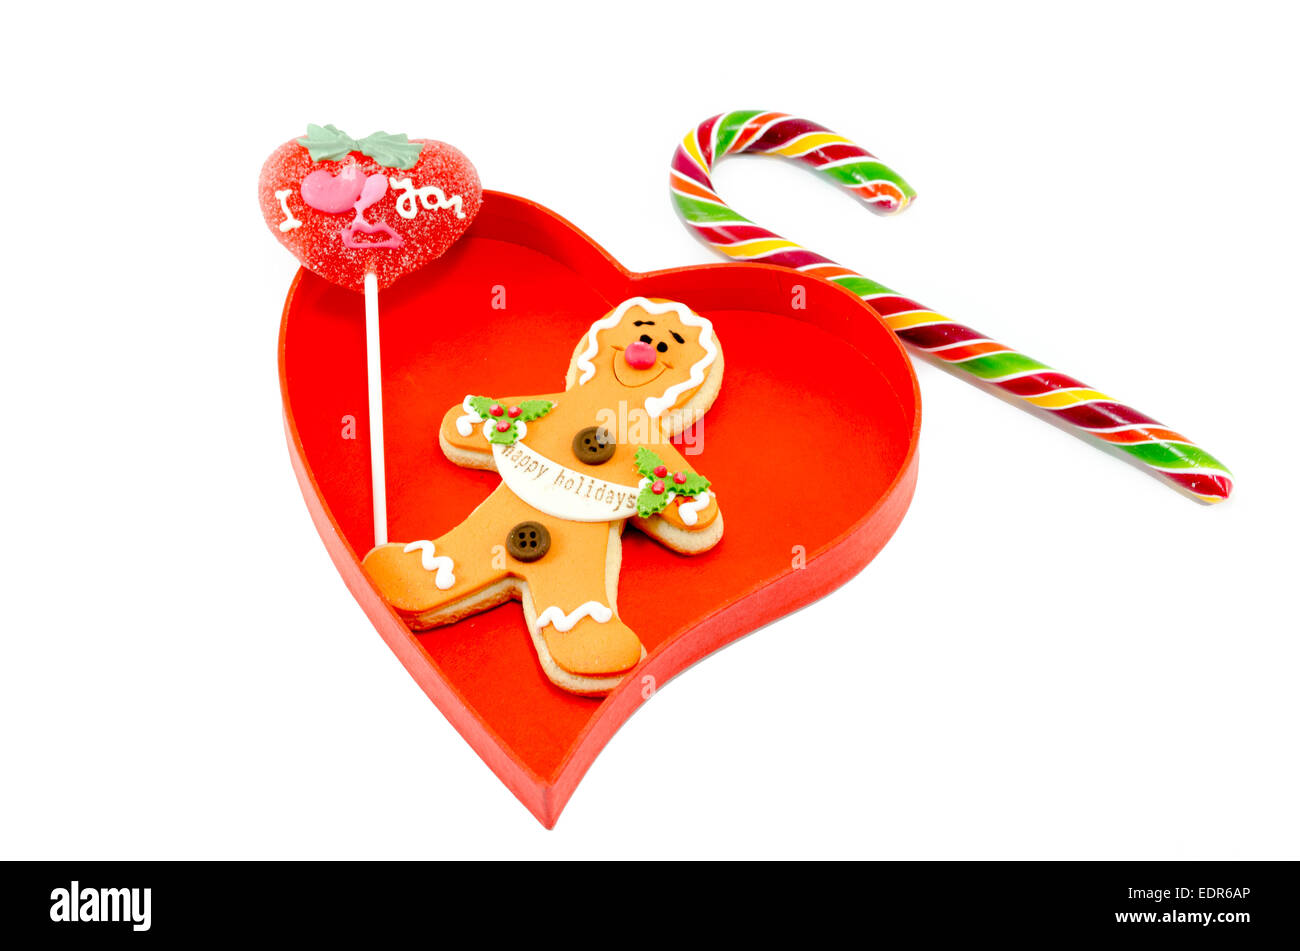 Gingerbread a candy cane and a lollipop in a heart shaped box isolated on white background Stock Photo